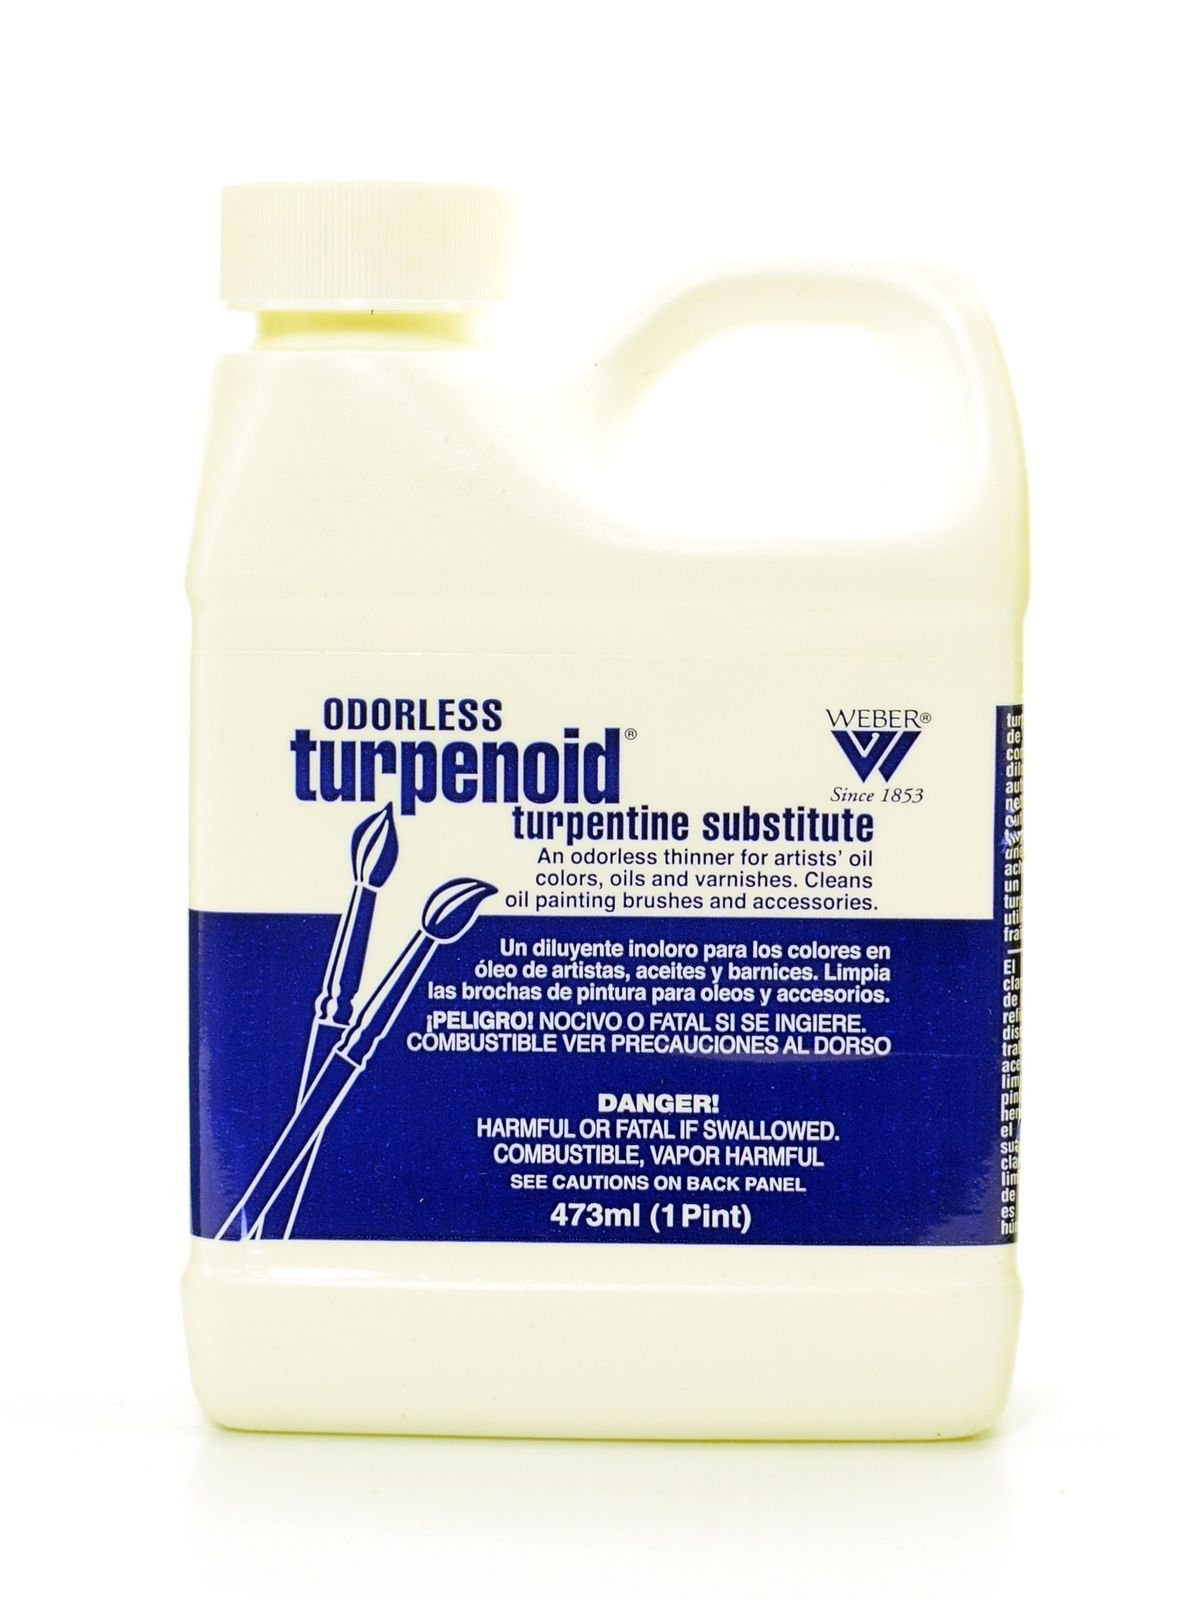 Turpenoid Odorless 8 Ounce 1682 by Weber - Brushes and More